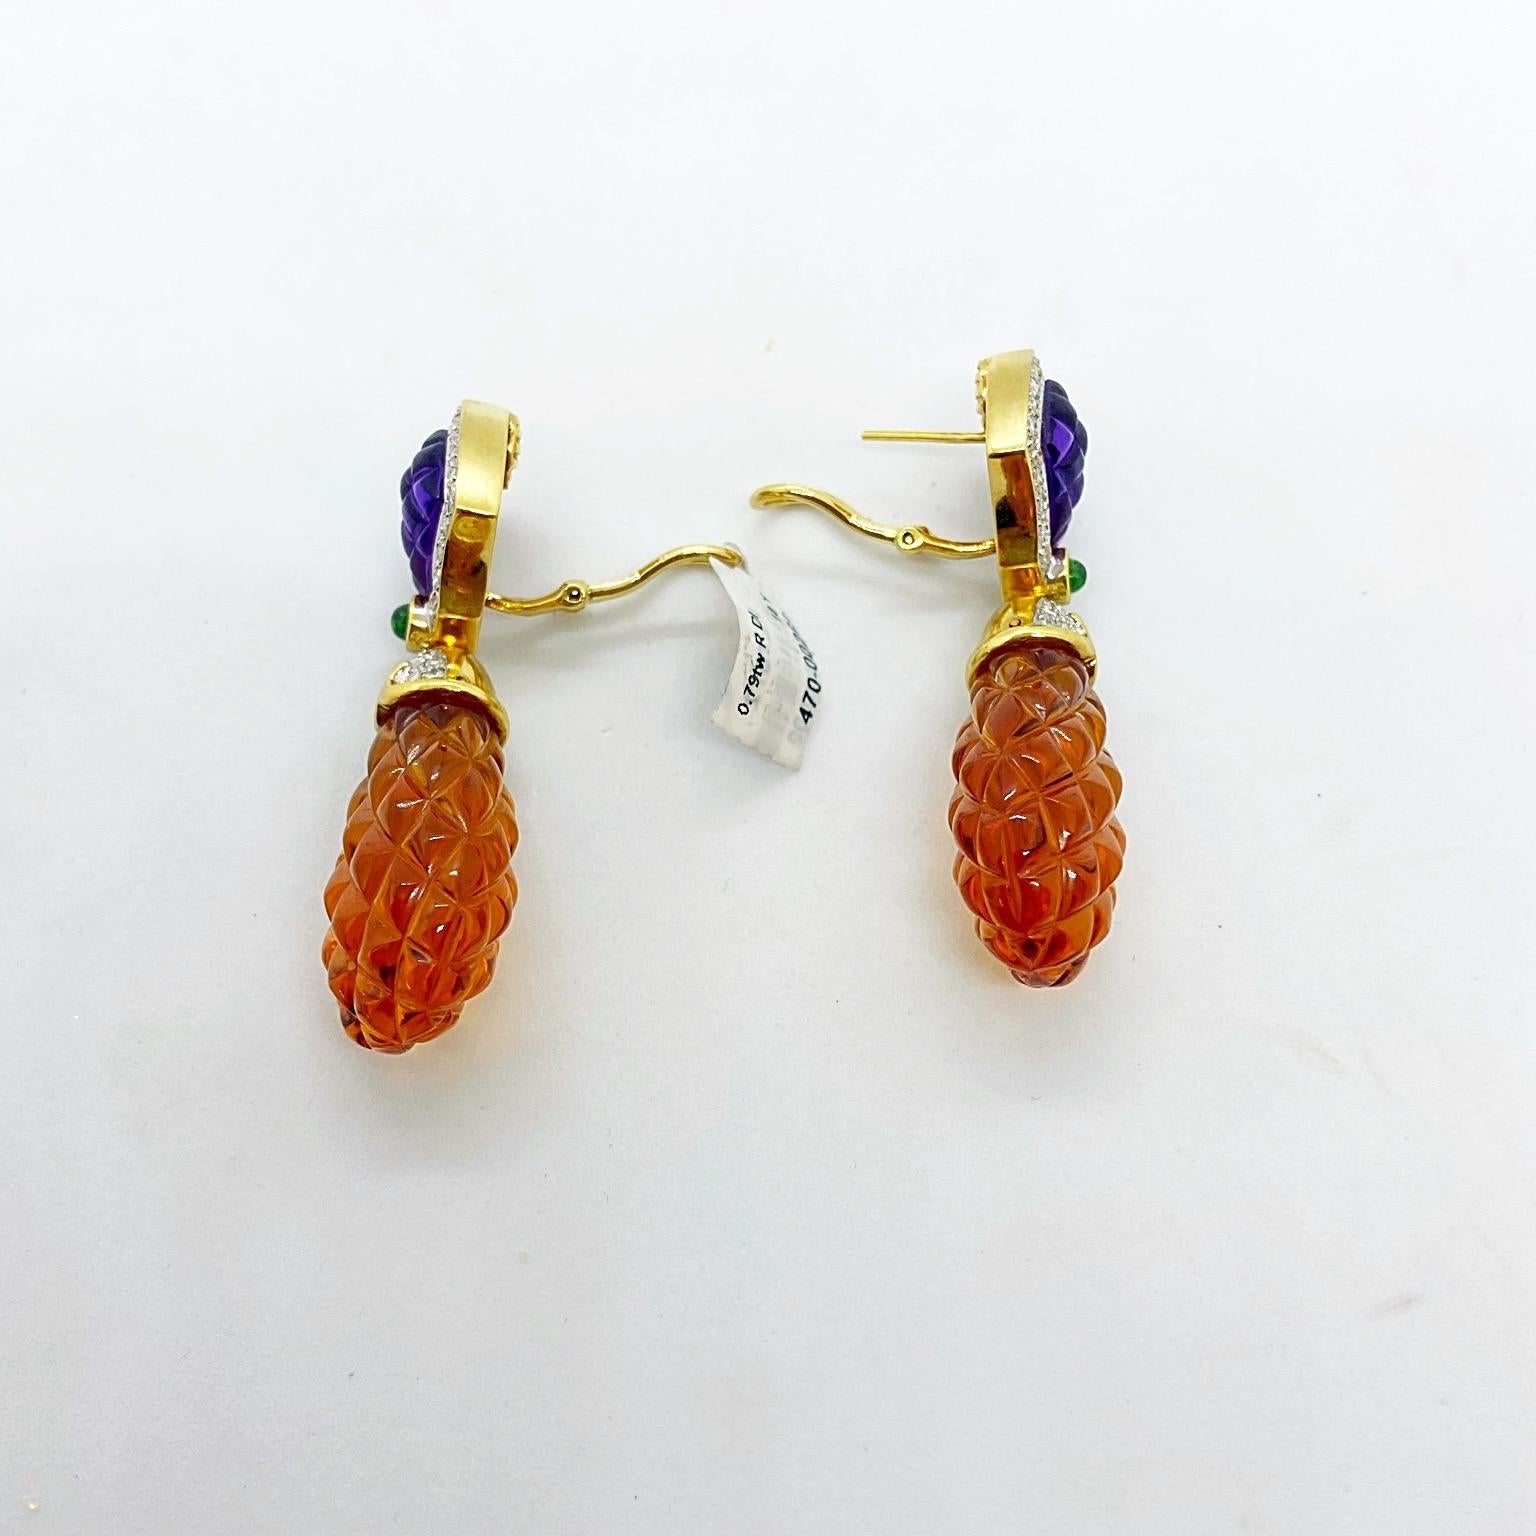 Beautiful Pineapple Earrings
These earrings are designed with a large carved teardrop shaped citrine stone., with a yellow gold and diamond cap. The top portion is carved amethyst outlined with a single row of diamonds. The two stones are joined